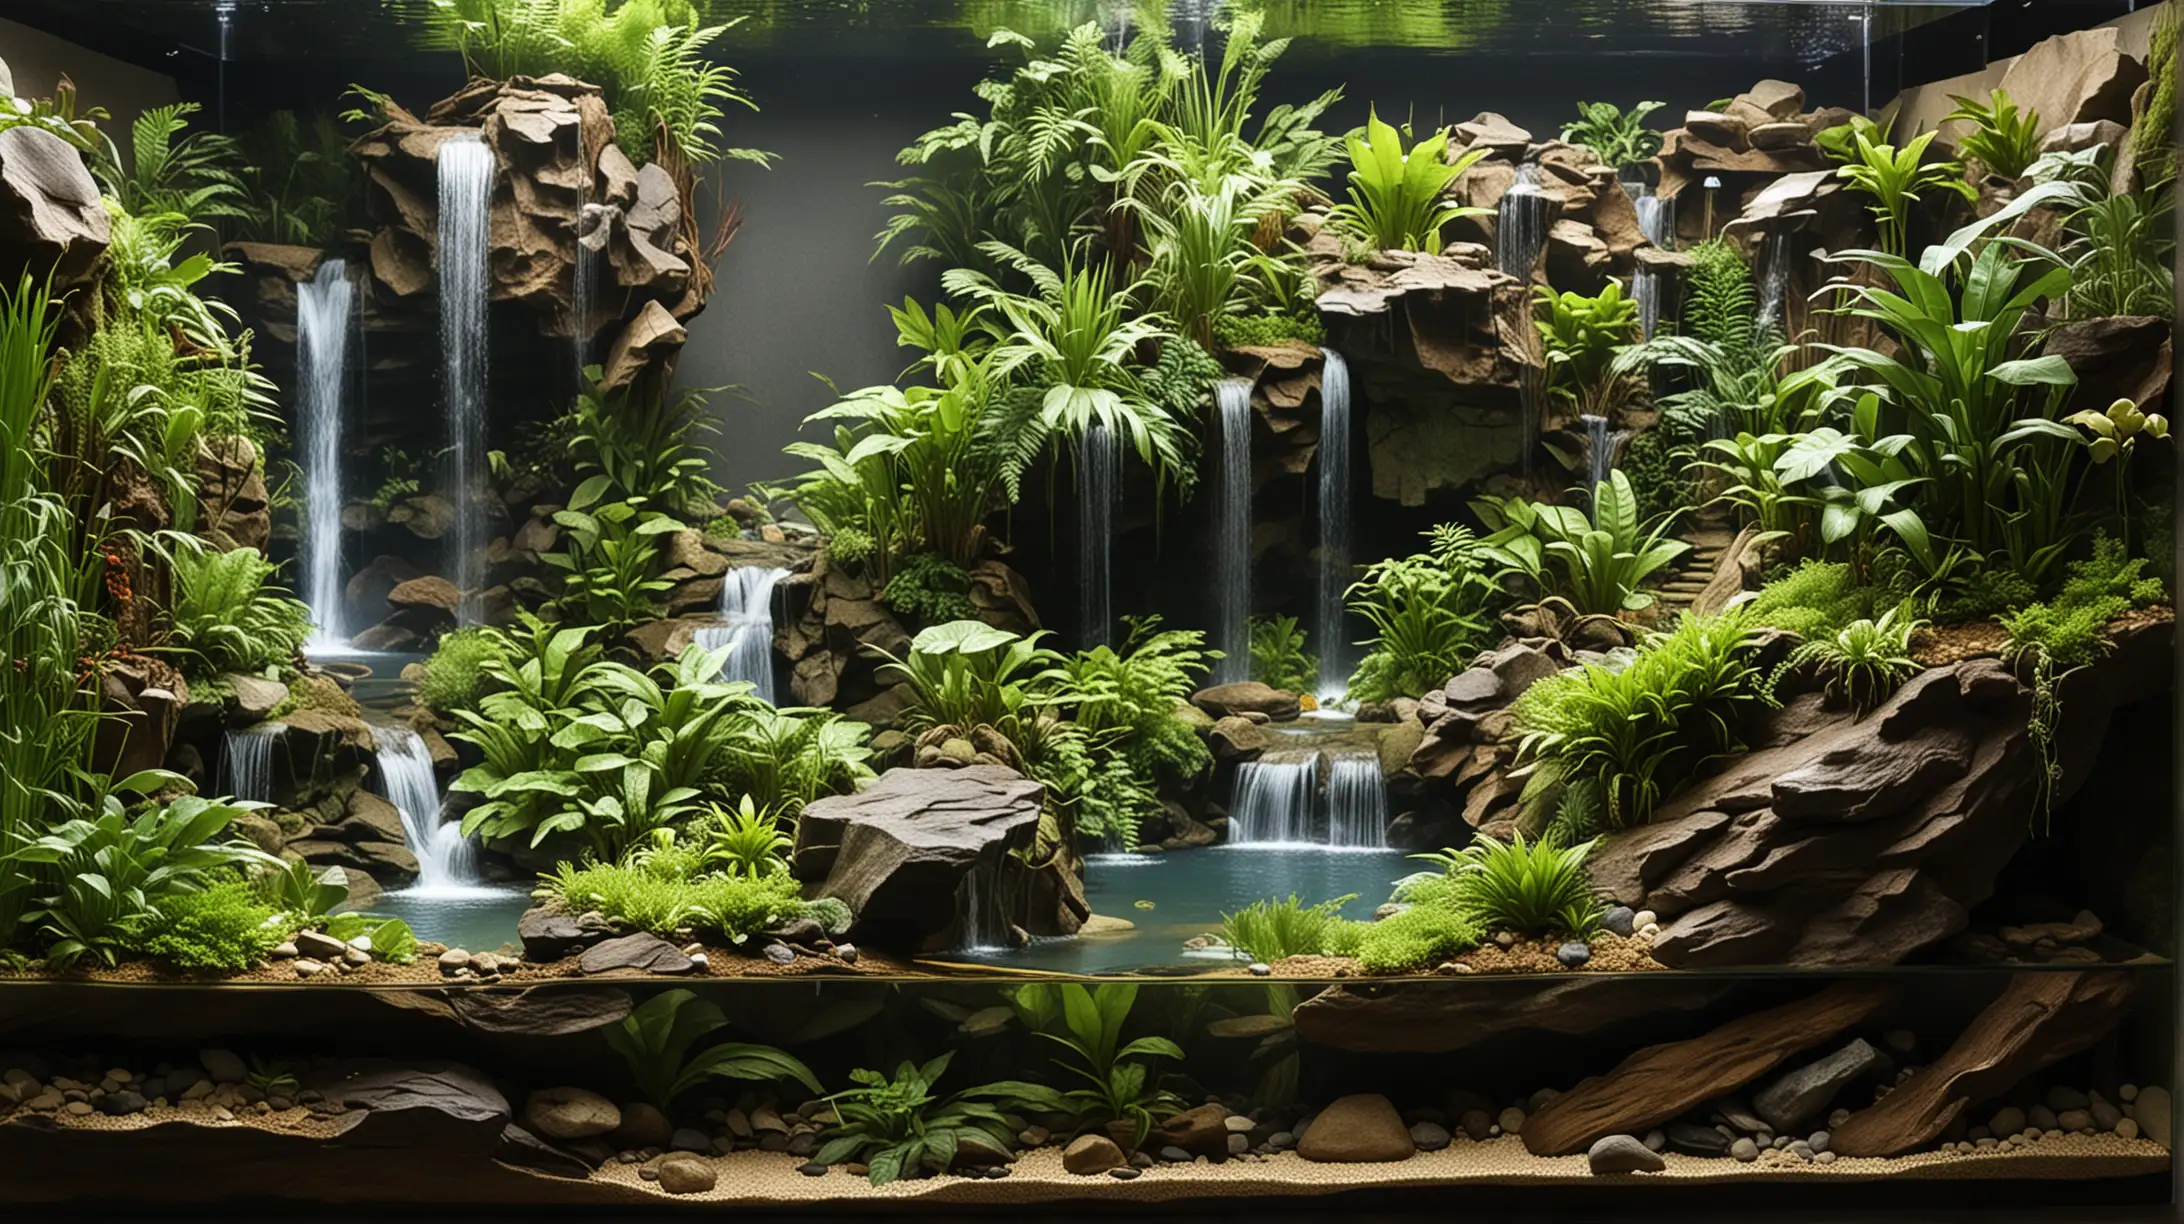 A multil-leveled terraced tropical layout in a 130cm by 45 cm by 70 cm paludarium tank adapted to a 175cm long snake with a cascading waterfall, a massive cliff feature on the left hand side, and an aquatic feature on the front of the tank paludarium.